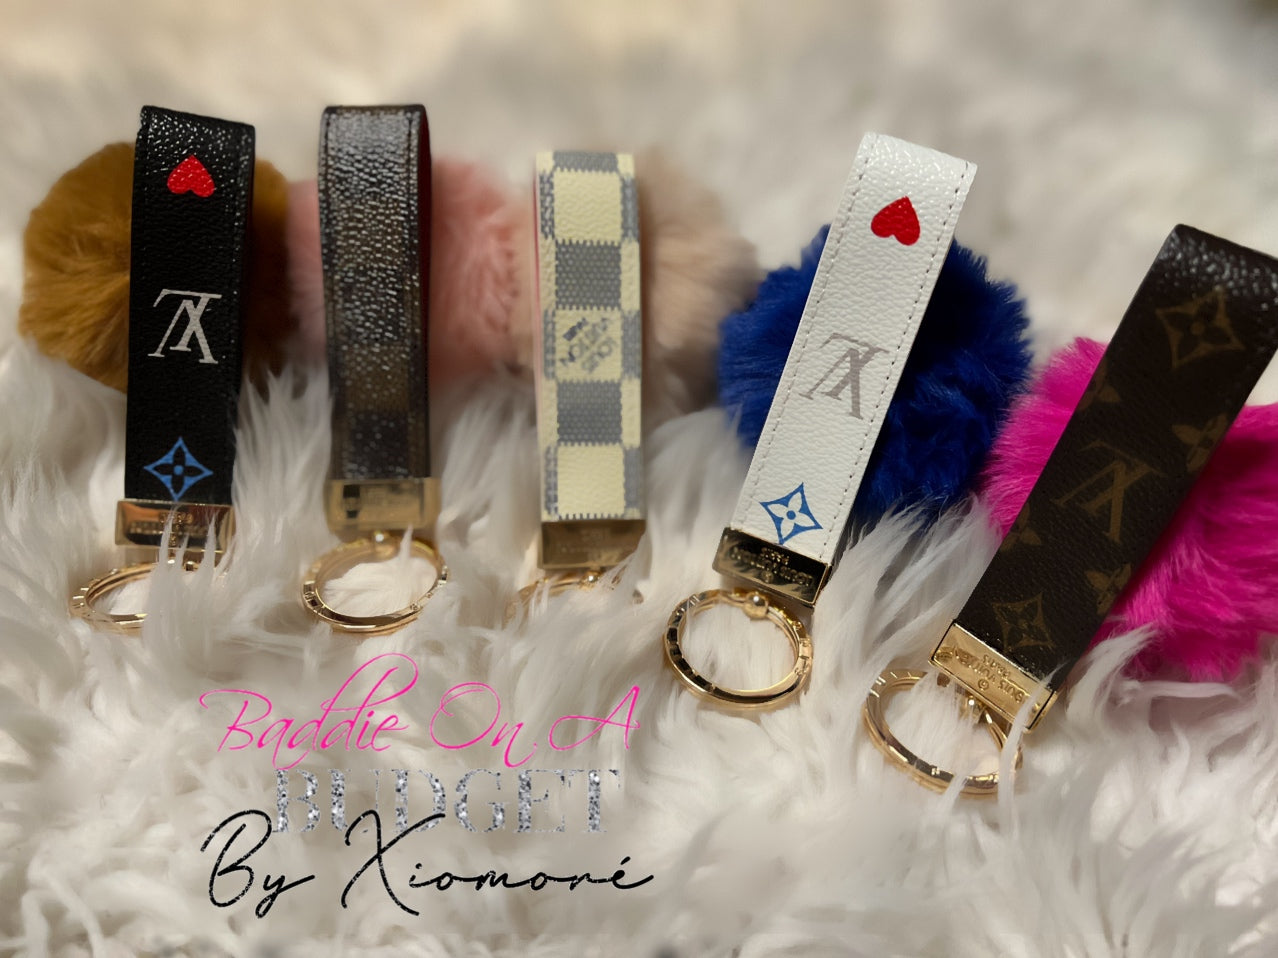 LV Lanyards W/Puff – Baddie On A Budget by Xiomore